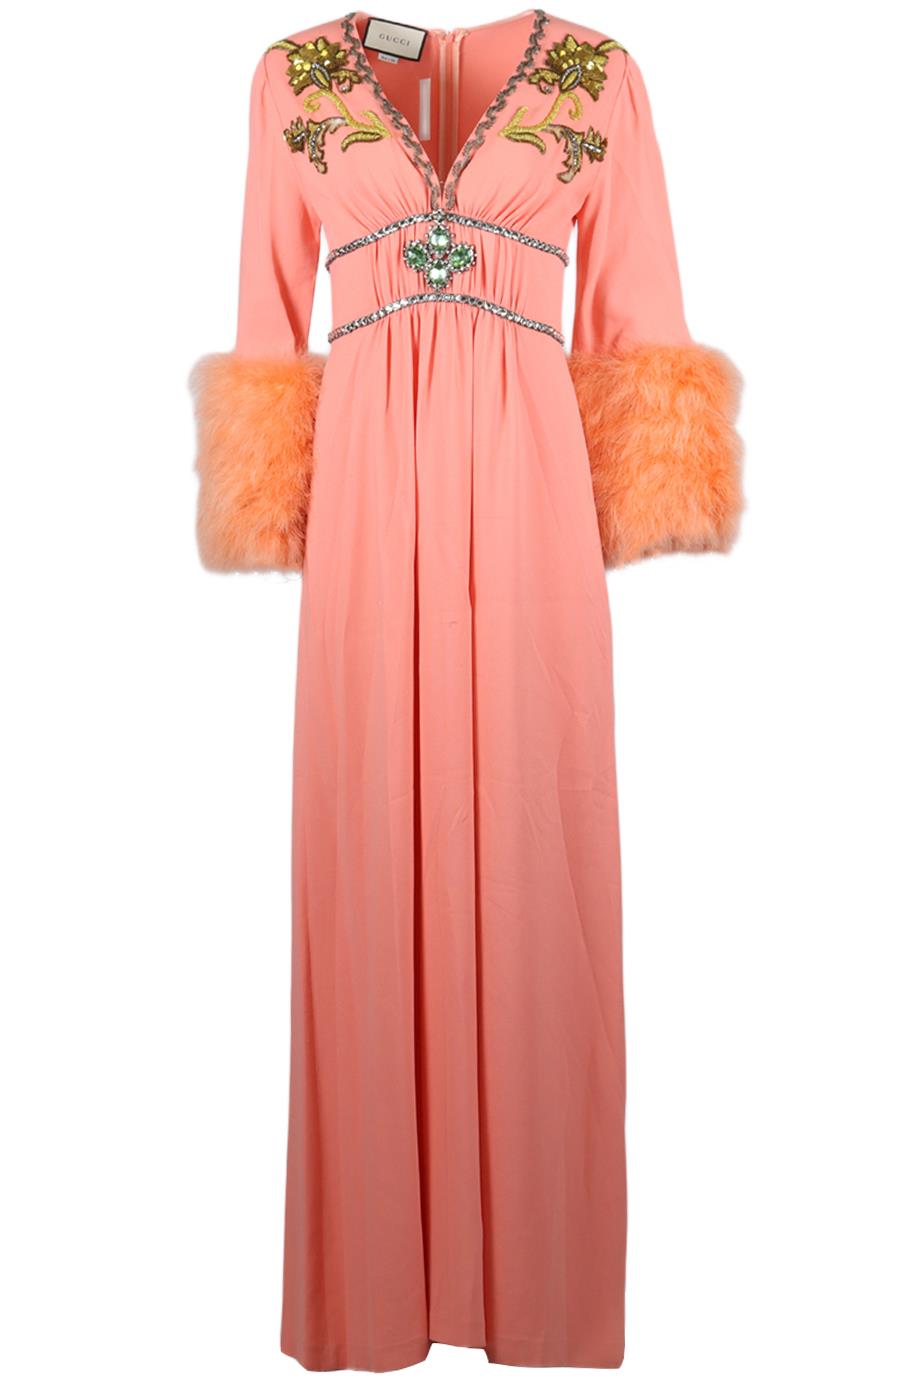 GUCCI FEATHER TRIMMED EMBELLISHED JERSEY GOWN SMALL-MEDIUM